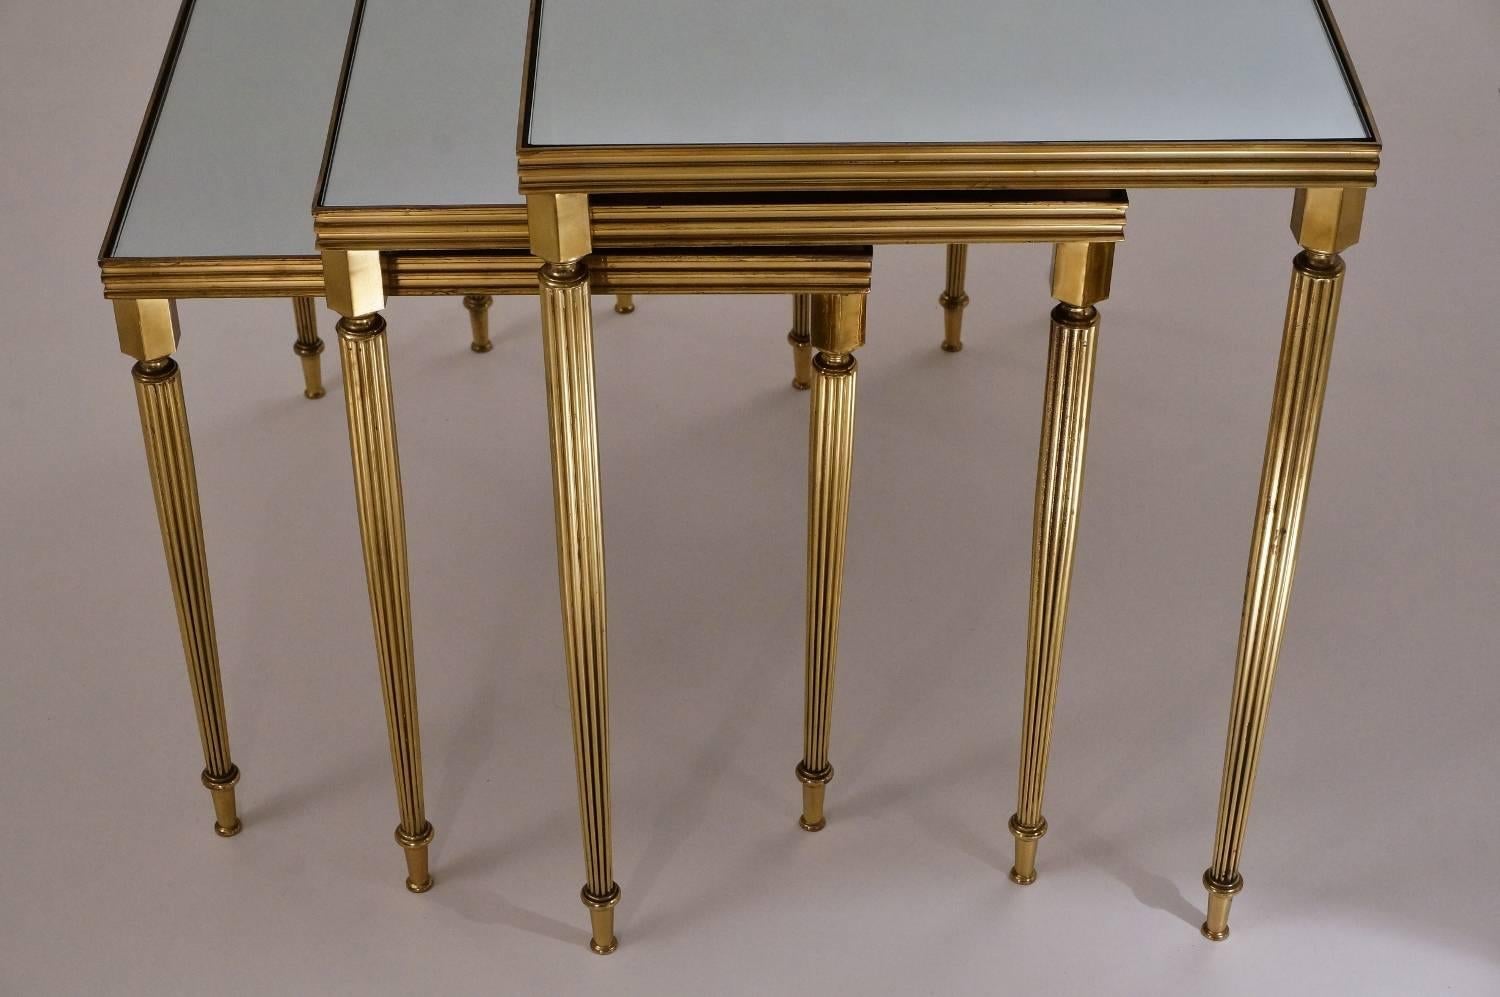 Maison Baguès Nesting Tables, Brass and Mirror, 1969, French 3